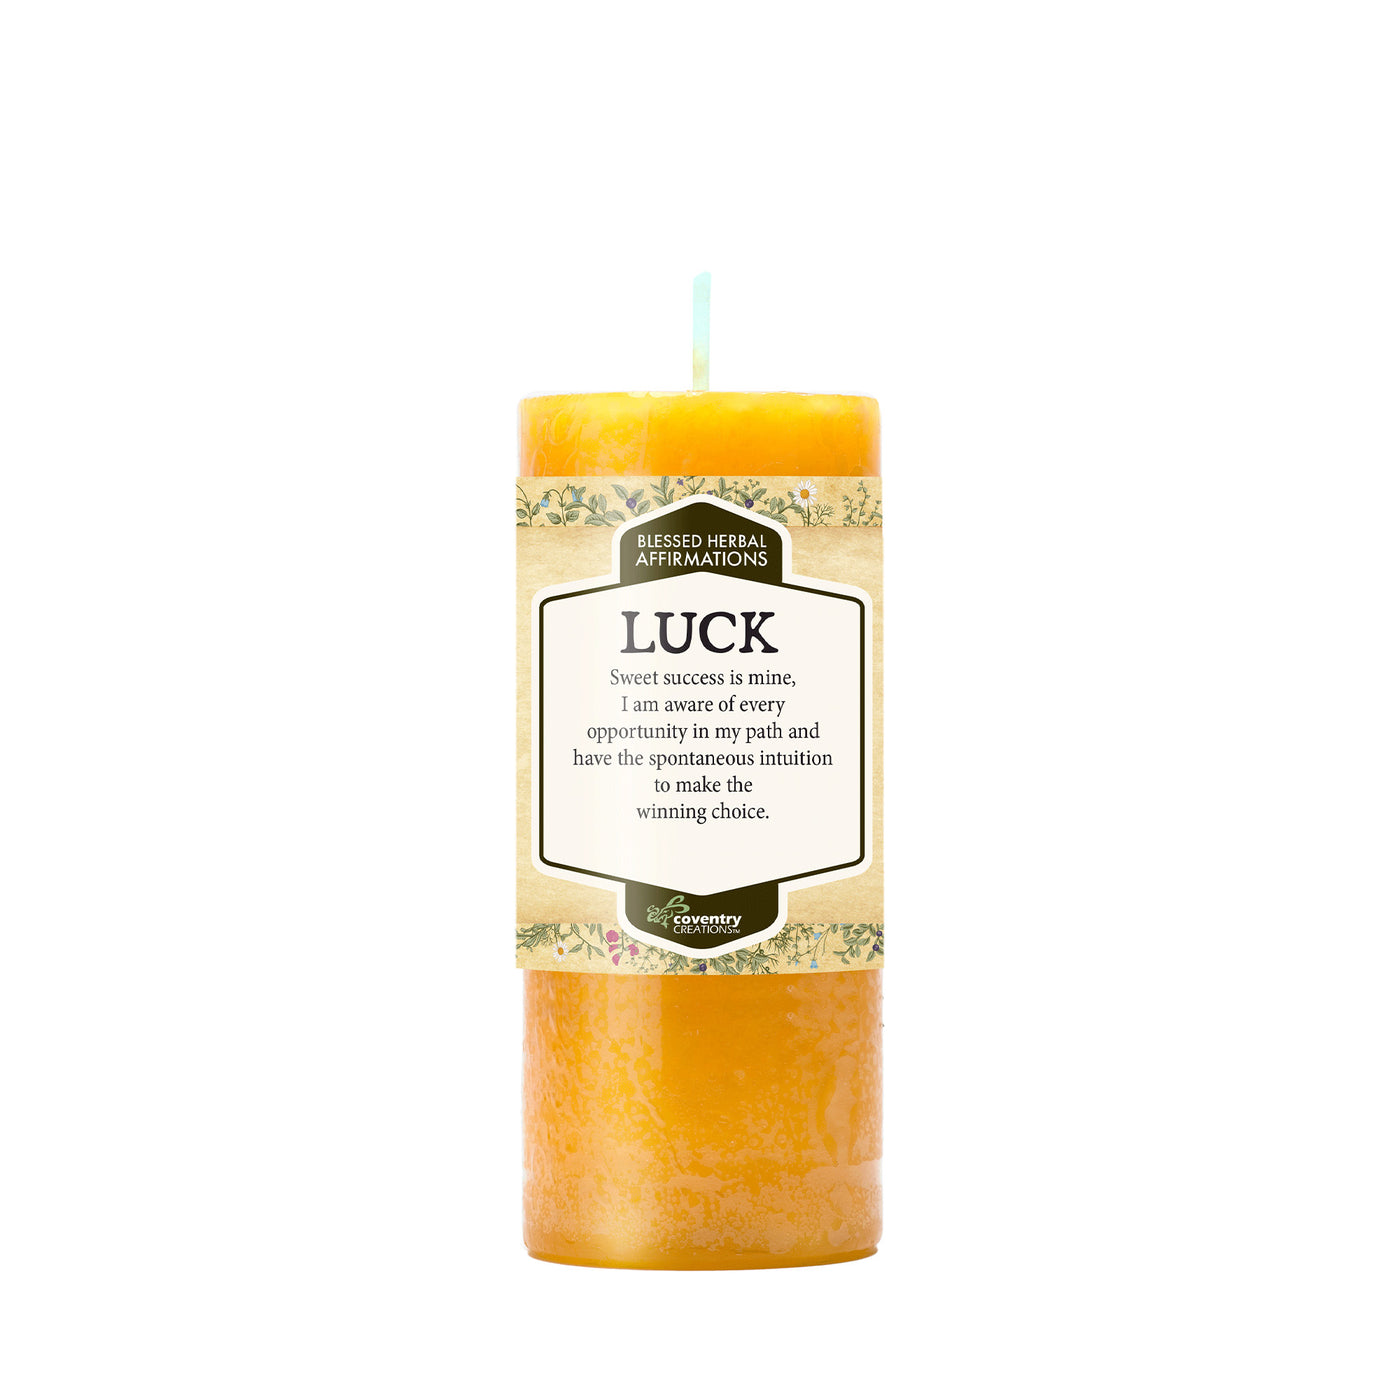 Coventry Creations Affirmation Luck Golden Yellow candle